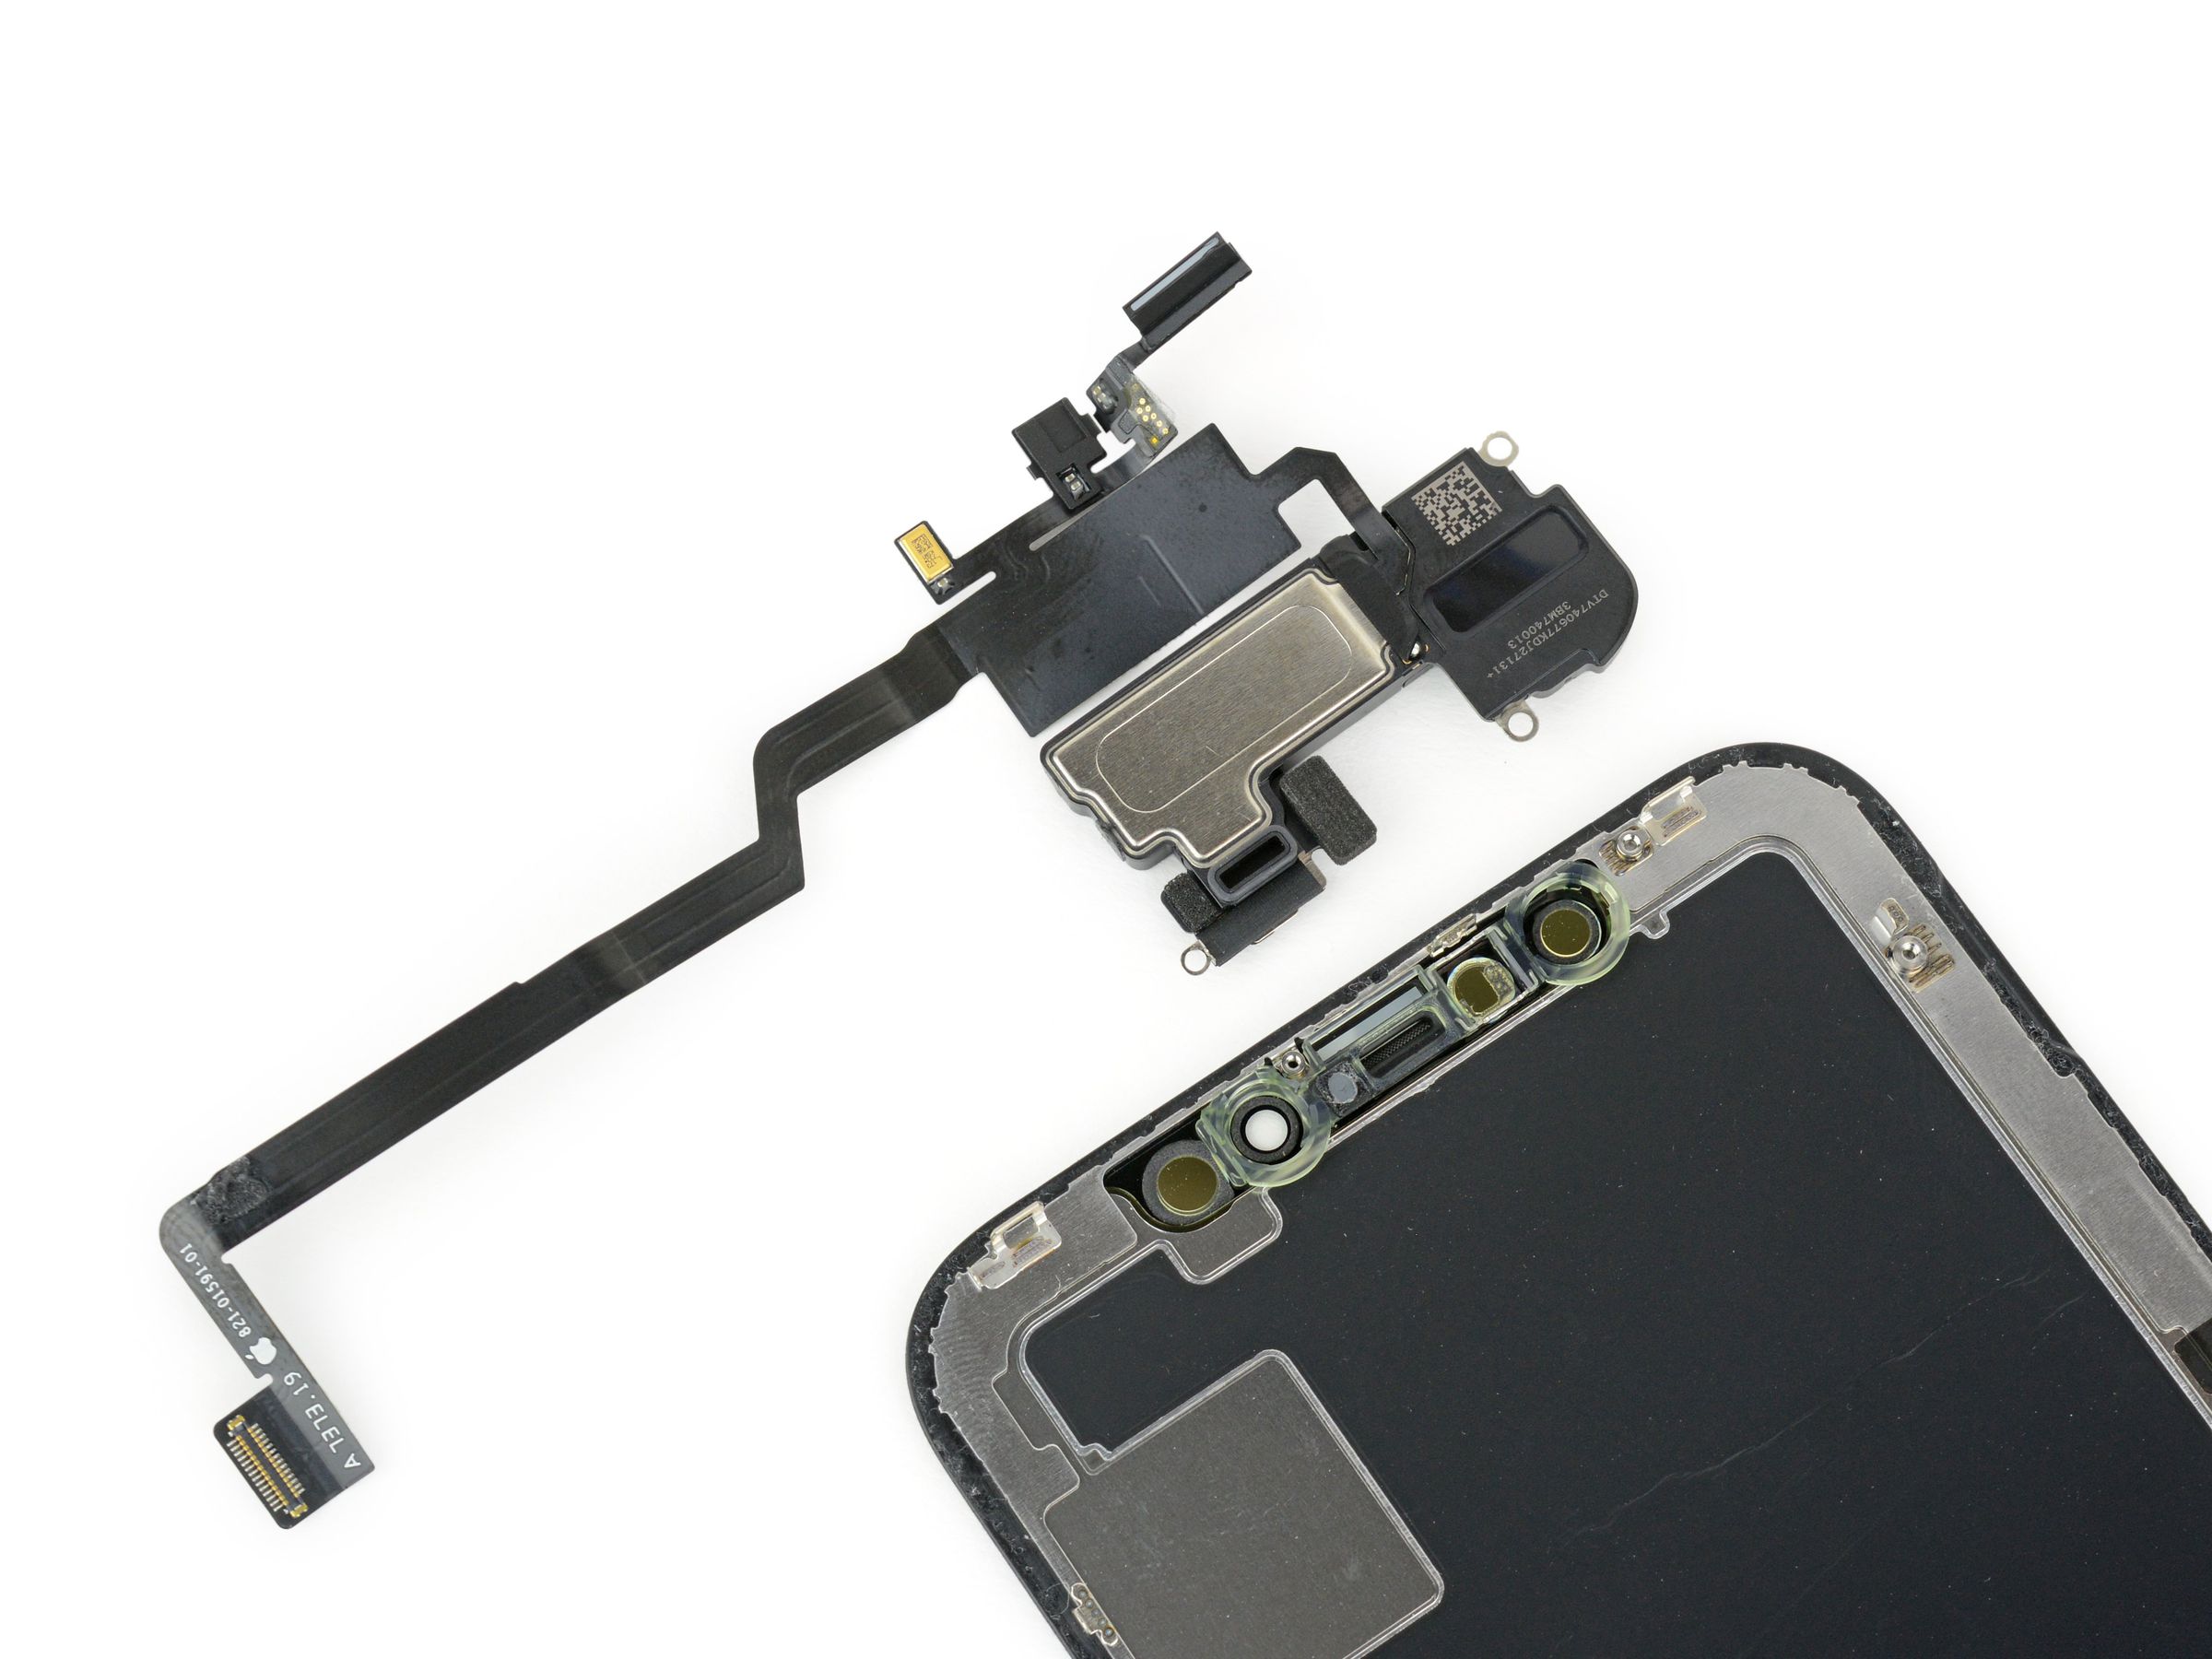 The flood illuminator is a part of the display assembly, separate from the TrueDepth camera module. Failure to properly transfer it during a screen replacement previously would mean permanently losing Face ID.